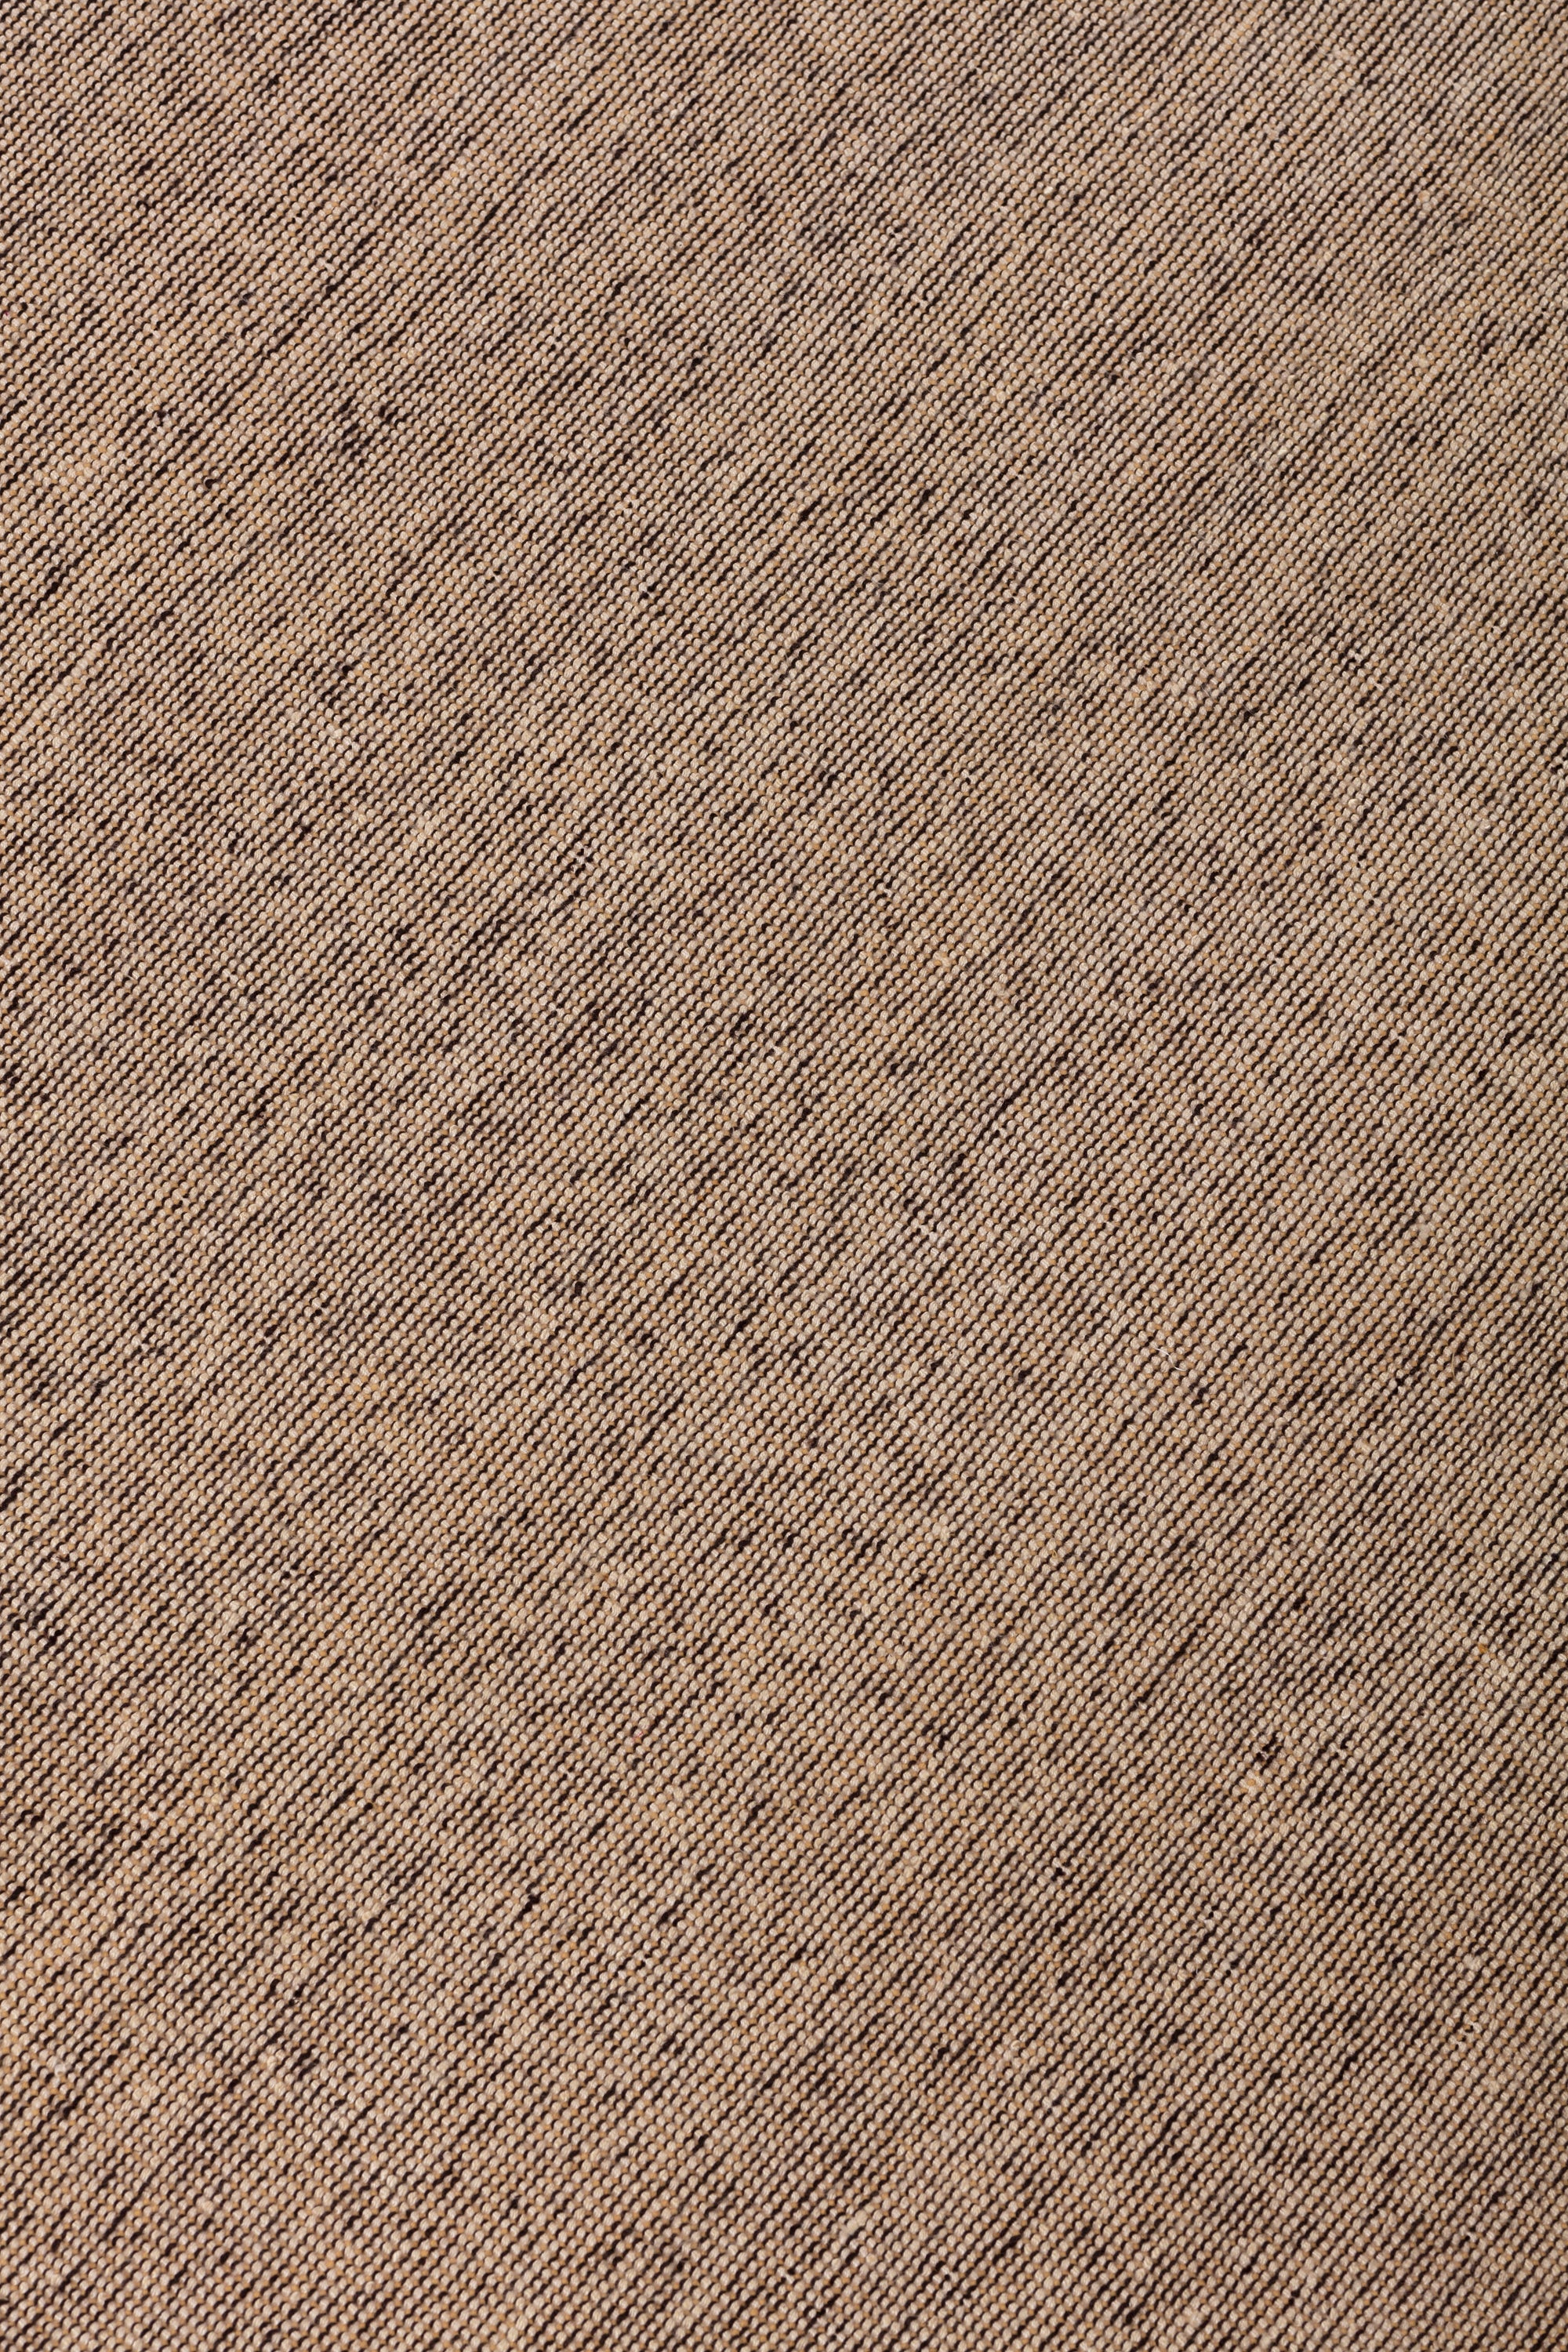 Detail of the Penta Rug in Pebble, a subtle striated pattern in warm taupe. 